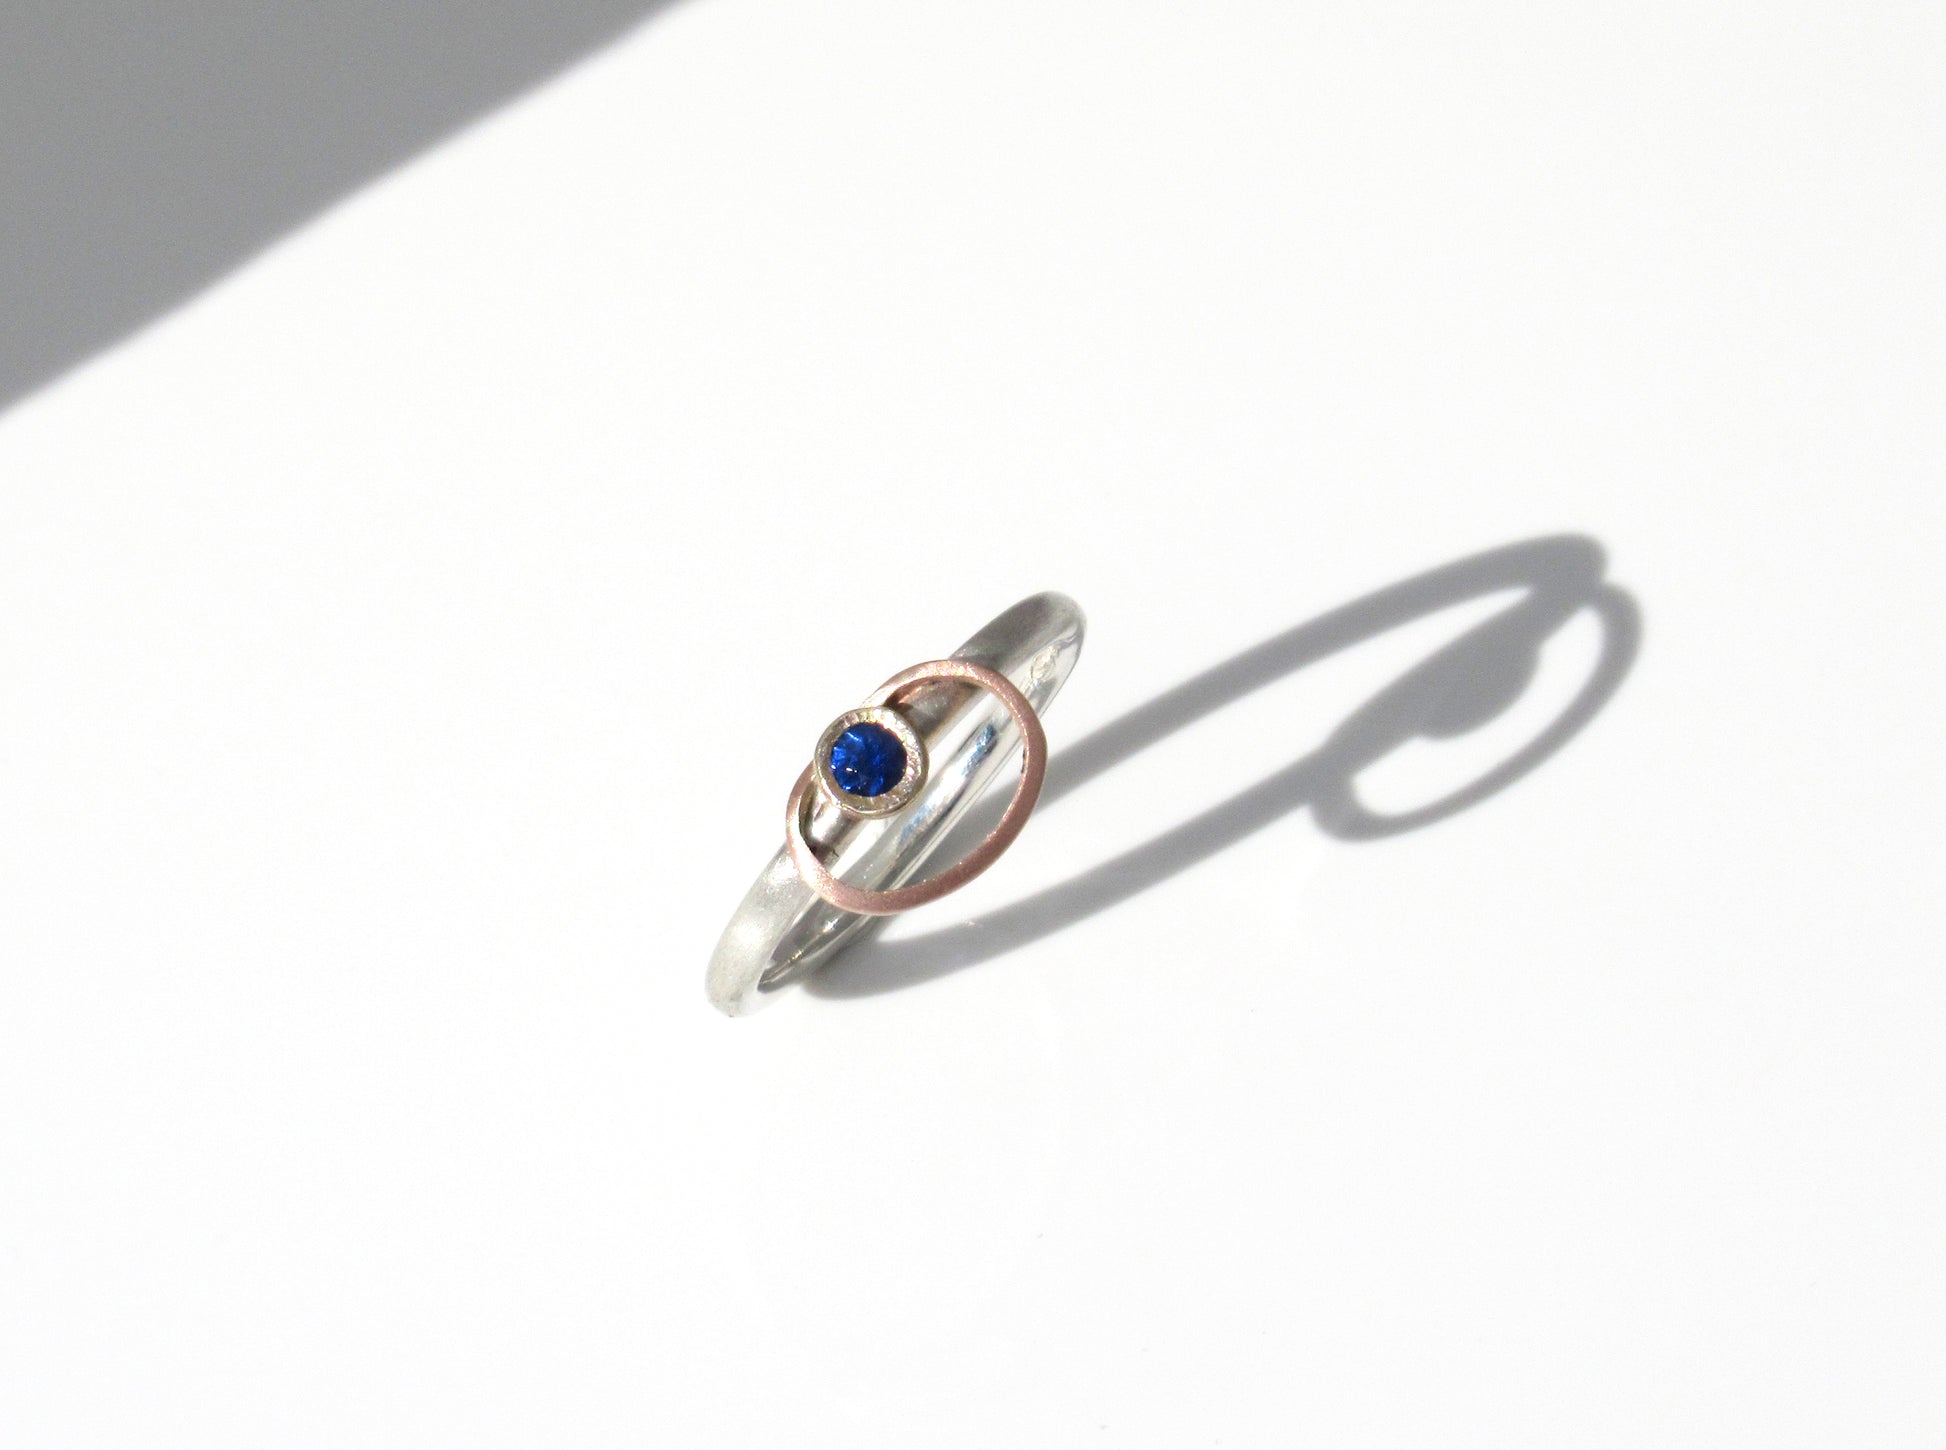 Blue sapphire ring by ZEALmetal in Kingston ON Canada available for world wide shipping